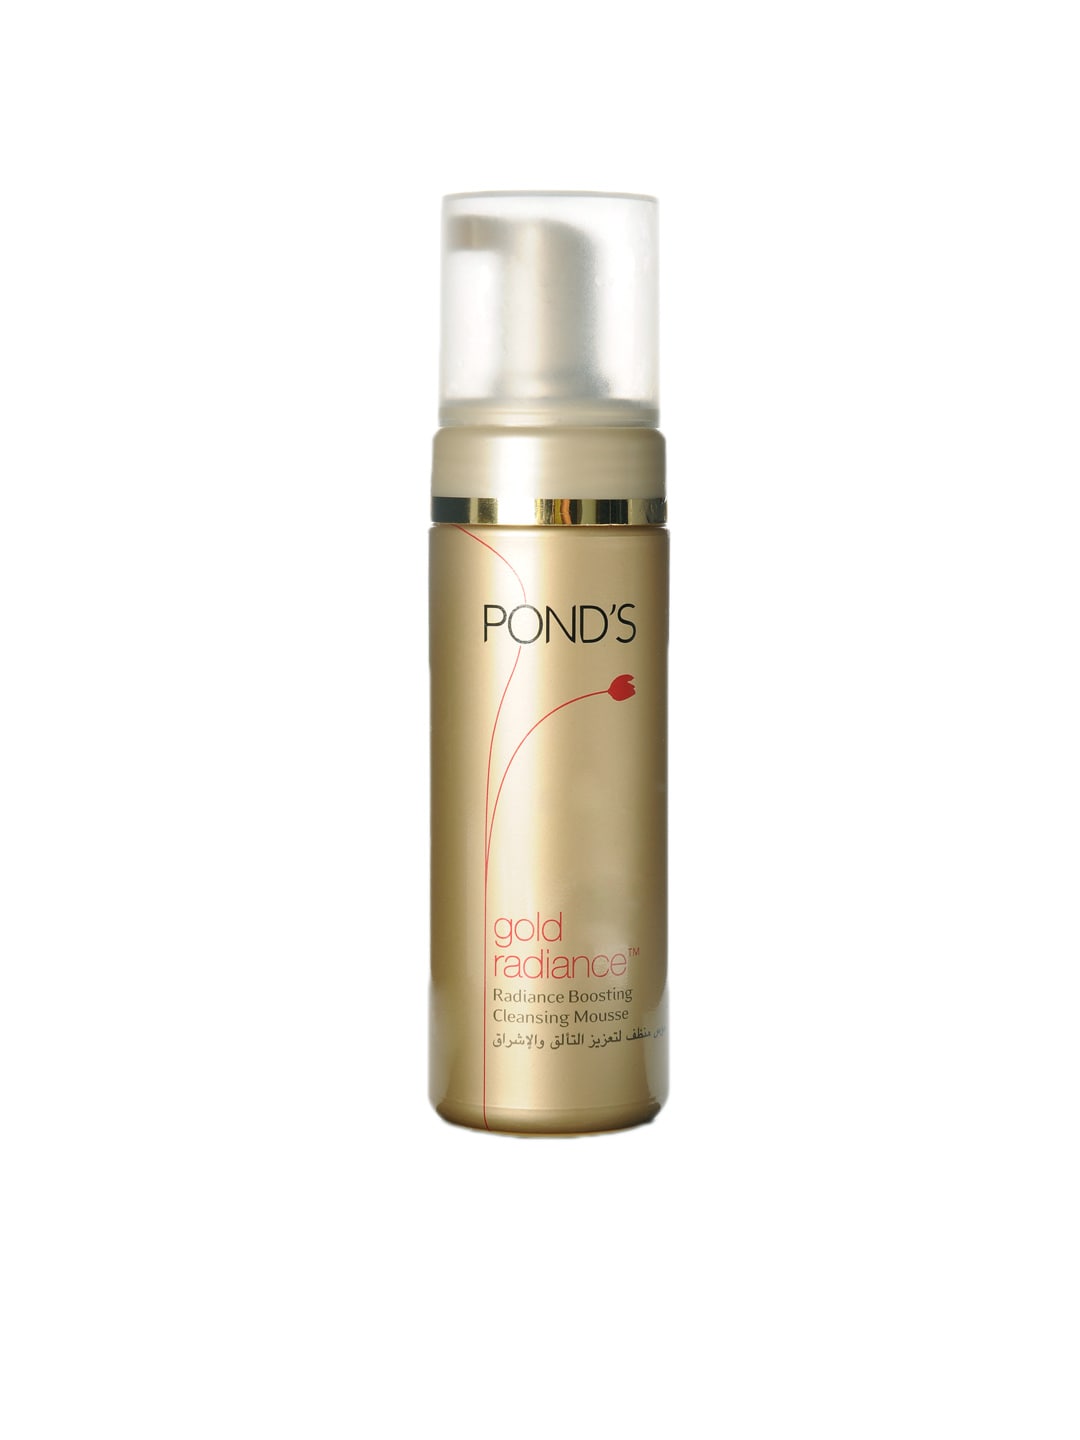 Pond's Radiance Boosting Cleansing Mousse